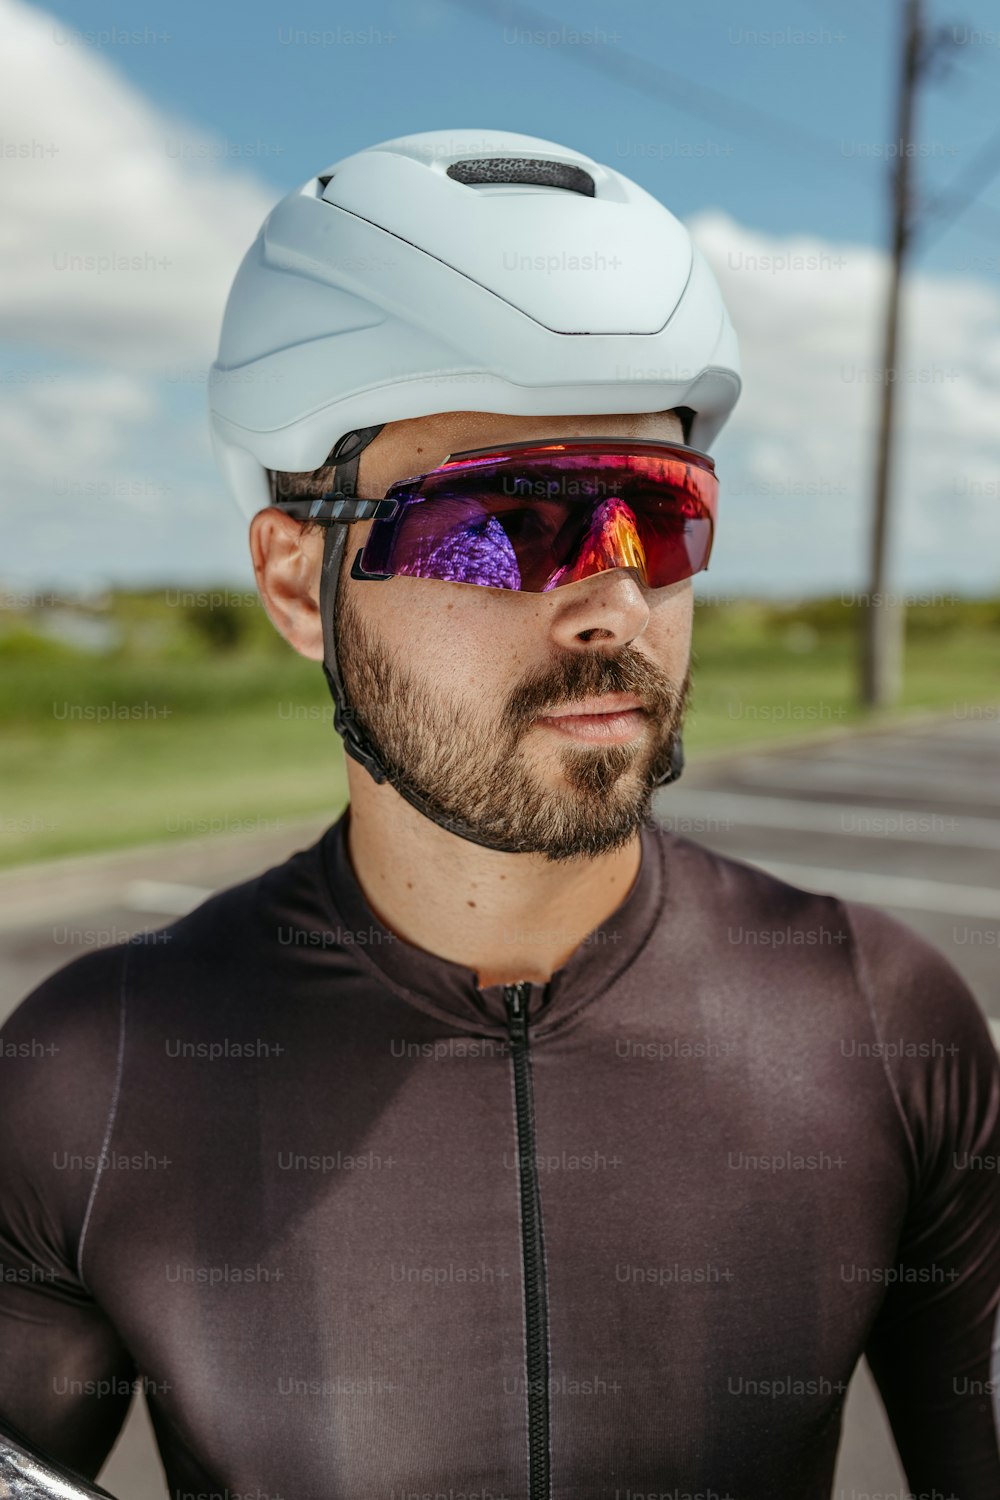 a man wearing a helmet and sunglasses while riding a bike